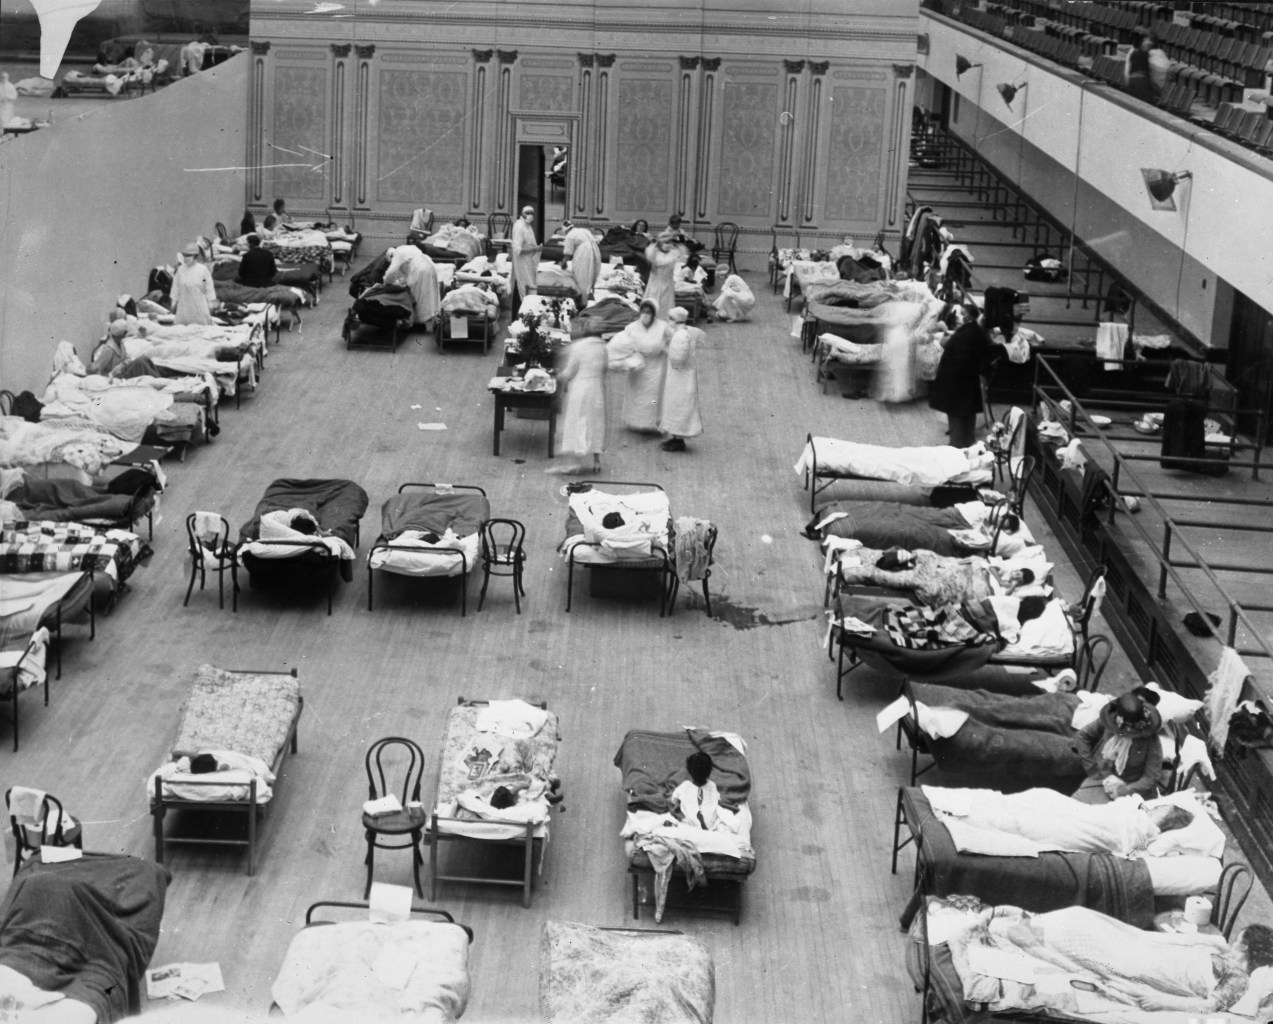 Volunteer nurses from the American Red Cross tending influenza sufferers in the Oakland Auditorium during the influenza pandemic of 1918. The Auditorium also housed the Oakland Art Gallery, which later birthed the Oakland Museum of California. From the Joseph R. Knowland collection at the Oakland History Room, Oakland Public Library, public domain.